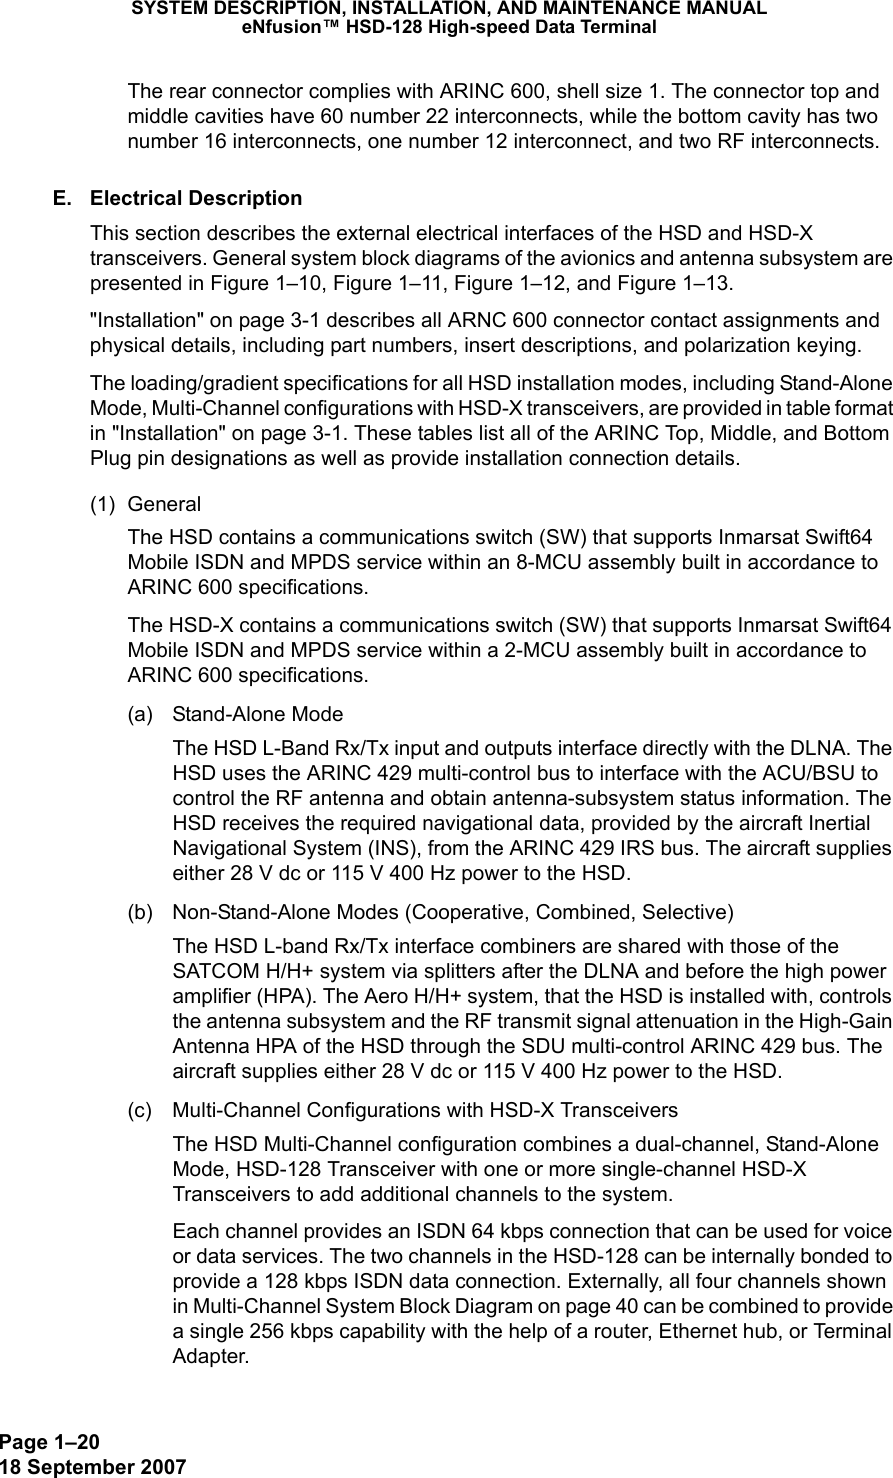 Page 1–2018 September 2007SYSTEM DESCRIPTION, INSTALLATION, AND MAINTENANCE MANUALeNfusion™ HSD-128 High-speed Data TerminalThe rear connector complies with ARINC 600, shell size 1. The connector top and middle cavities have 60 number 22 interconnects, while the bottom cavity has two number 16 interconnects, one number 12 interconnect, and two RF interconnects.  E. Electrical DescriptionThis section describes the external electrical interfaces of the HSD and HSD-X transceivers. General system block diagrams of the avionics and antenna subsystem are presented in Figure 1–10, Figure 1–11, Figure 1–12, and Figure 1–13.&quot;Installation&quot; on page 3-1 describes all ARNC 600 connector contact assignments and physical details, including part numbers, insert descriptions, and polarization keying.The loading/gradient specifications for all HSD installation modes, including Stand-Alone Mode, Multi-Channel configurations with HSD-X transceivers, are provided in table format in &quot;Installation&quot; on page 3-1. These tables list all of the ARINC Top, Middle, and Bottom Plug pin designations as well as provide installation connection details.(1) General The HSD contains a communications switch (SW) that supports Inmarsat Swift64 Mobile ISDN and MPDS service within an 8-MCU assembly built in accordance to ARINC 600 specifications.The HSD-X contains a communications switch (SW) that supports Inmarsat Swift64 Mobile ISDN and MPDS service within a 2-MCU assembly built in accordance to ARINC 600 specifications.(a) Stand-Alone ModeThe HSD L-Band Rx/Tx input and outputs interface directly with the DLNA. The HSD uses the ARINC 429 multi-control bus to interface with the ACU/BSU to control the RF antenna and obtain antenna-subsystem status information. The HSD receives the required navigational data, provided by the aircraft Inertial Navigational System (INS), from the ARINC 429 IRS bus. The aircraft supplies either 28 V dc or 115 V 400 Hz power to the HSD. (b) Non-Stand-Alone Modes (Cooperative, Combined, Selective)The HSD L-band Rx/Tx interface combiners are shared with those of the SATCOM H/H+ system via splitters after the DLNA and before the high power amplifier (HPA). The Aero H/H+ system, that the HSD is installed with, controls the antenna subsystem and the RF transmit signal attenuation in the High-Gain Antenna HPA of the HSD through the SDU multi-control ARINC 429 bus. The aircraft supplies either 28 V dc or 115 V 400 Hz power to the HSD.(c) Multi-Channel Configurations with HSD-X TransceiversThe HSD Multi-Channel configuration combines a dual-channel, Stand-Alone Mode, HSD-128 Transceiver with one or more single-channel HSD-X Transceivers to add additional channels to the system.  Each channel provides an ISDN 64 kbps connection that can be used for voice or data services. The two channels in the HSD-128 can be internally bonded to provide a 128 kbps ISDN data connection. Externally, all four channels shown in Multi-Channel System Block Diagram on page 40 can be combined to provide a single 256 kbps capability with the help of a router, Ethernet hub, or Terminal Adapter.